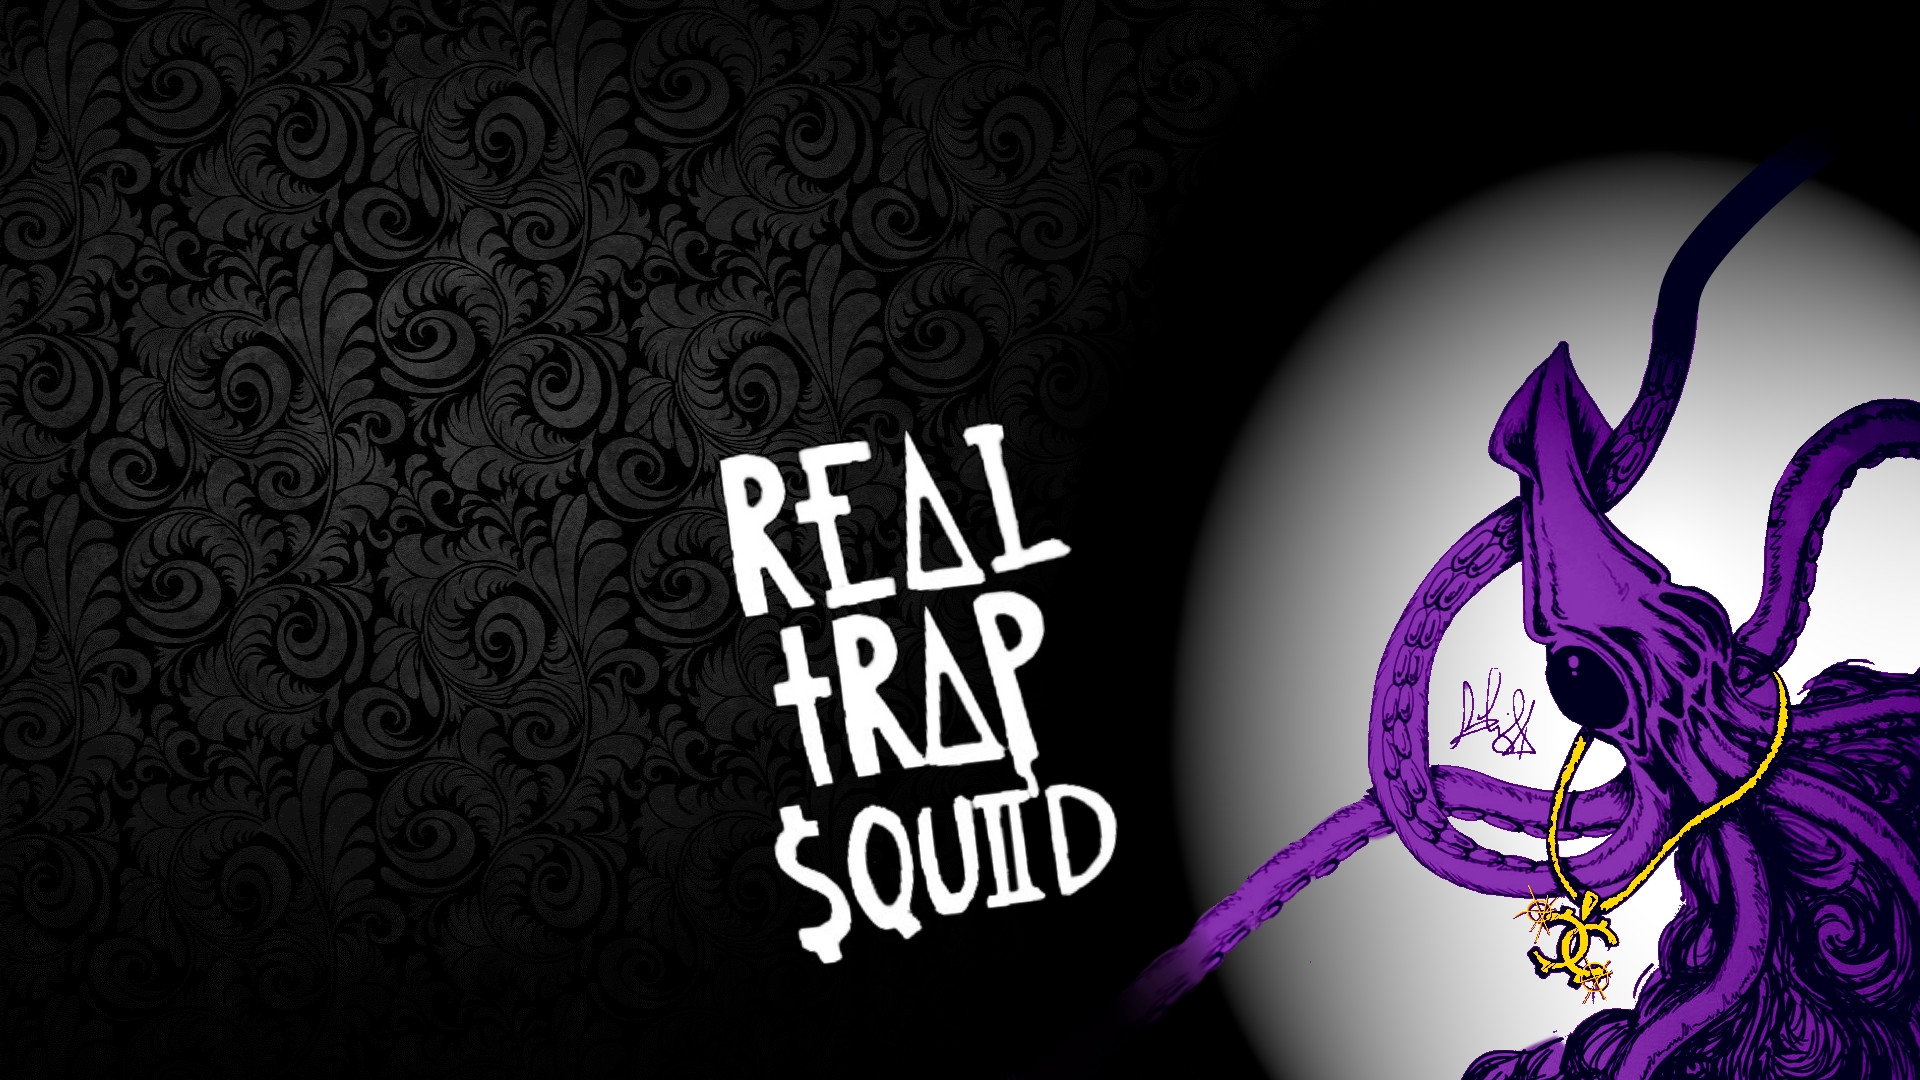 Free download Made a 1920x1080 wallpaper of the Trap Squid rWallpapers showed 1920x1080 for ...